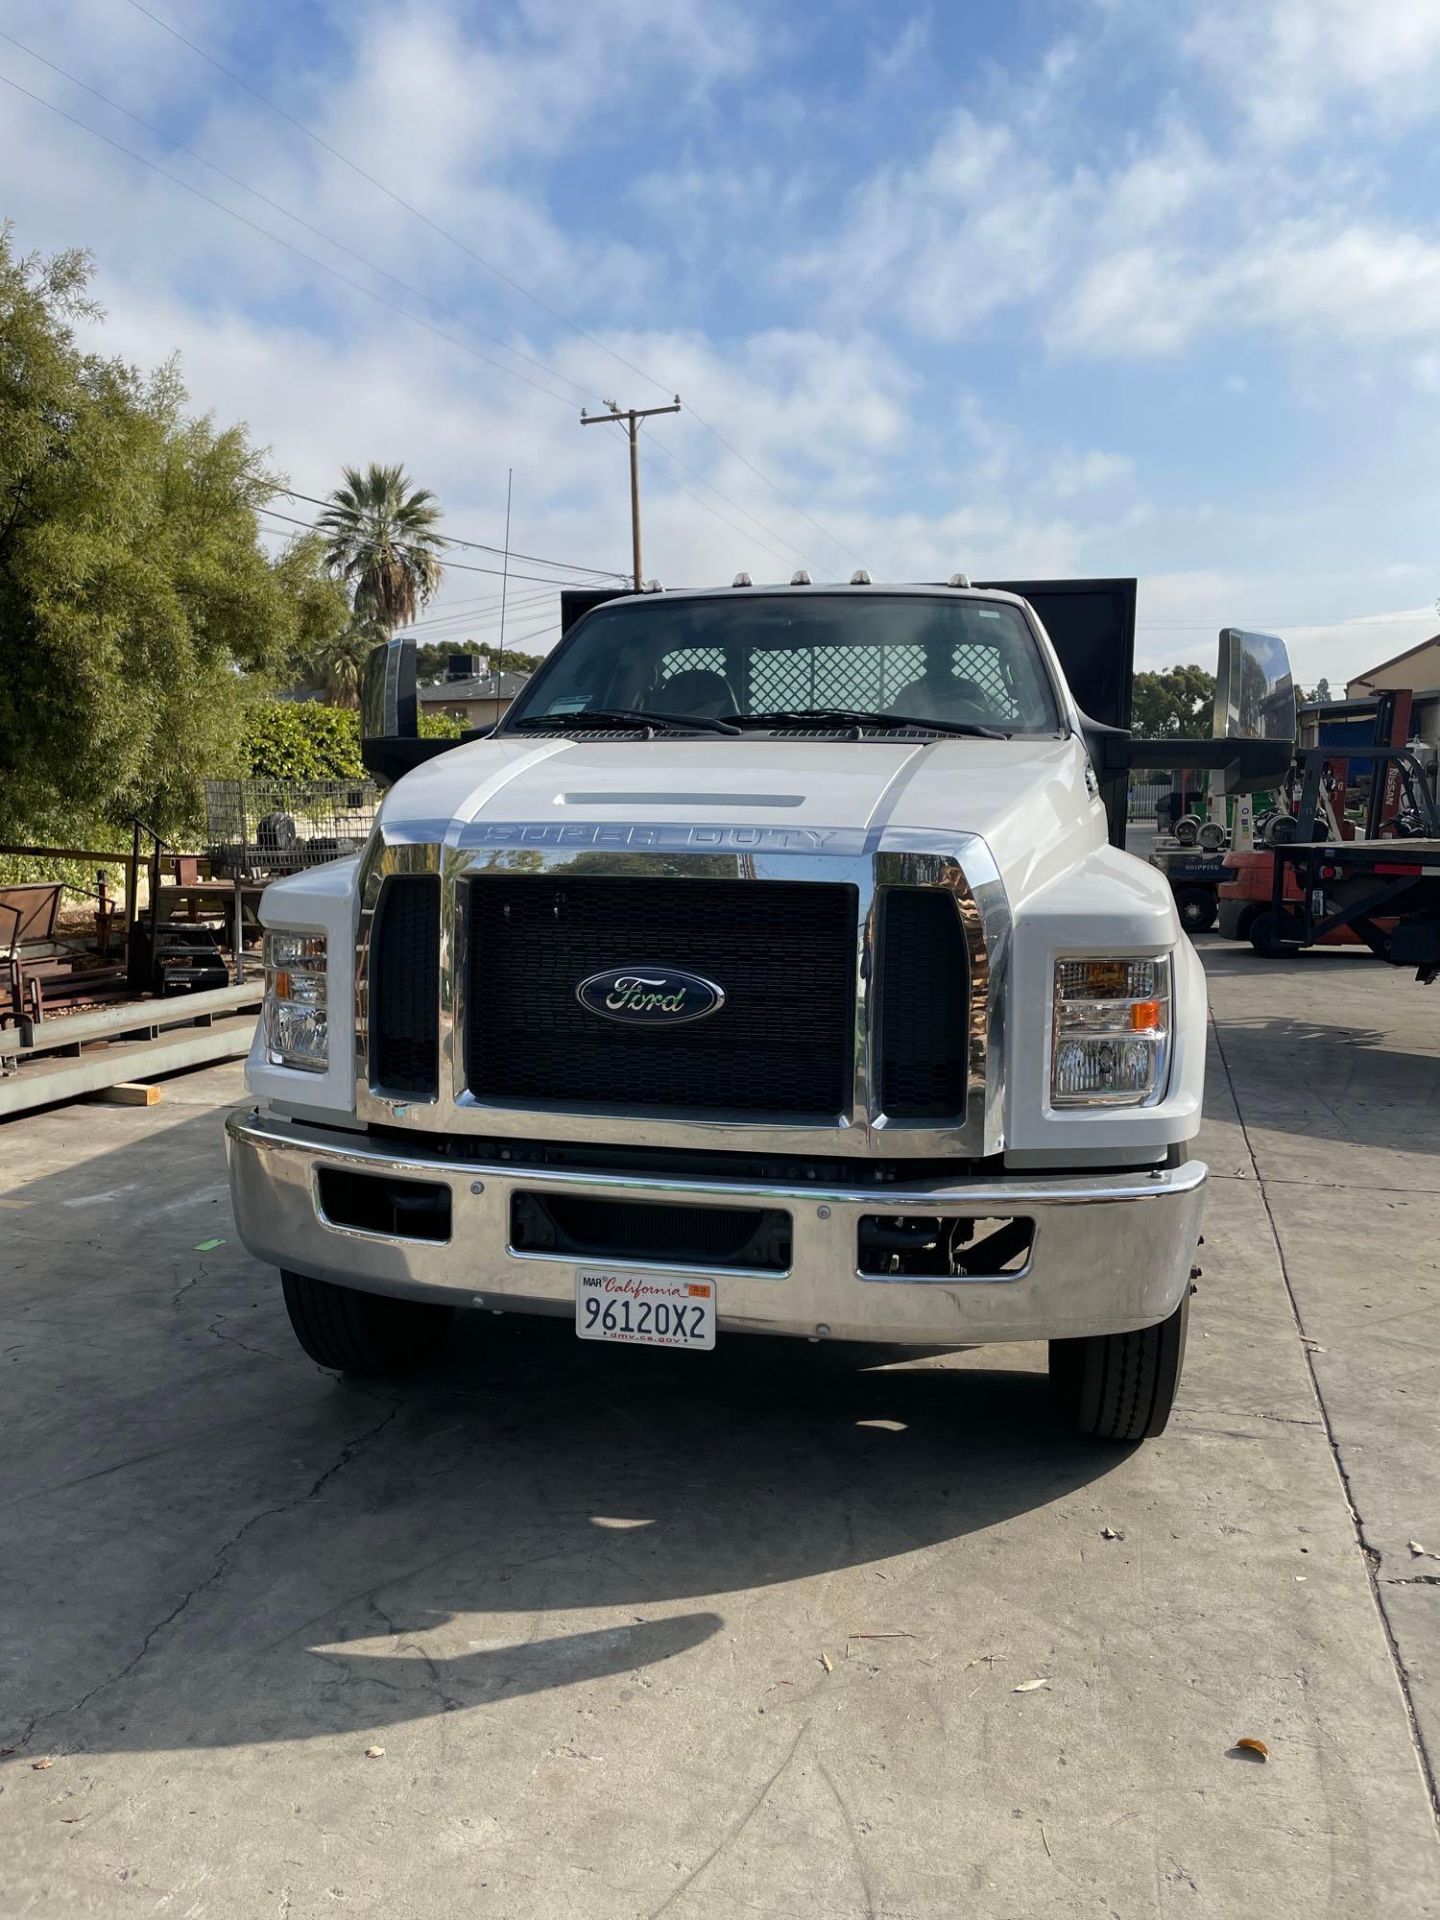 Ford F-650 Super Duty Stake Bed Truck, Dually, Cummins TD, 16,811 Miles, New 2019 - Image 2 of 12